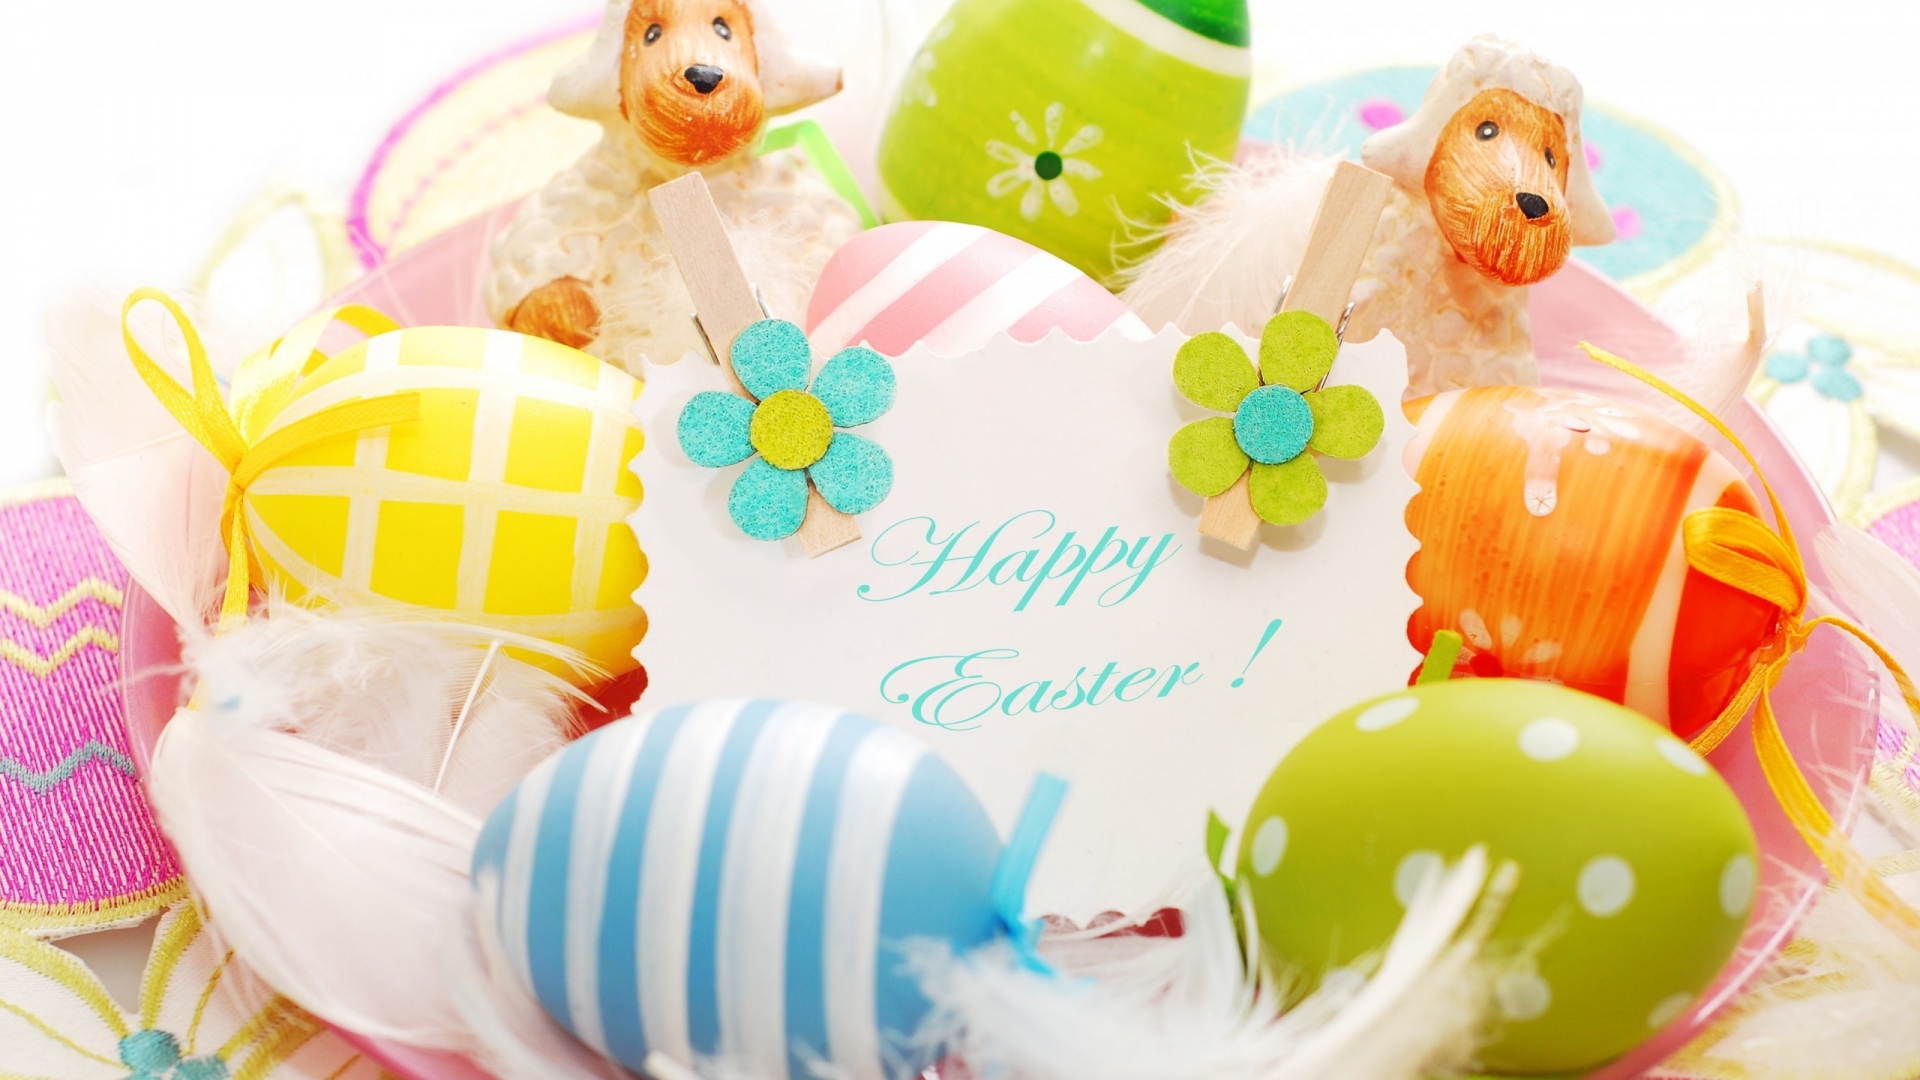 2014 Happy Easter Decorations for 1920 x 1080 HDTV 1080p resolution